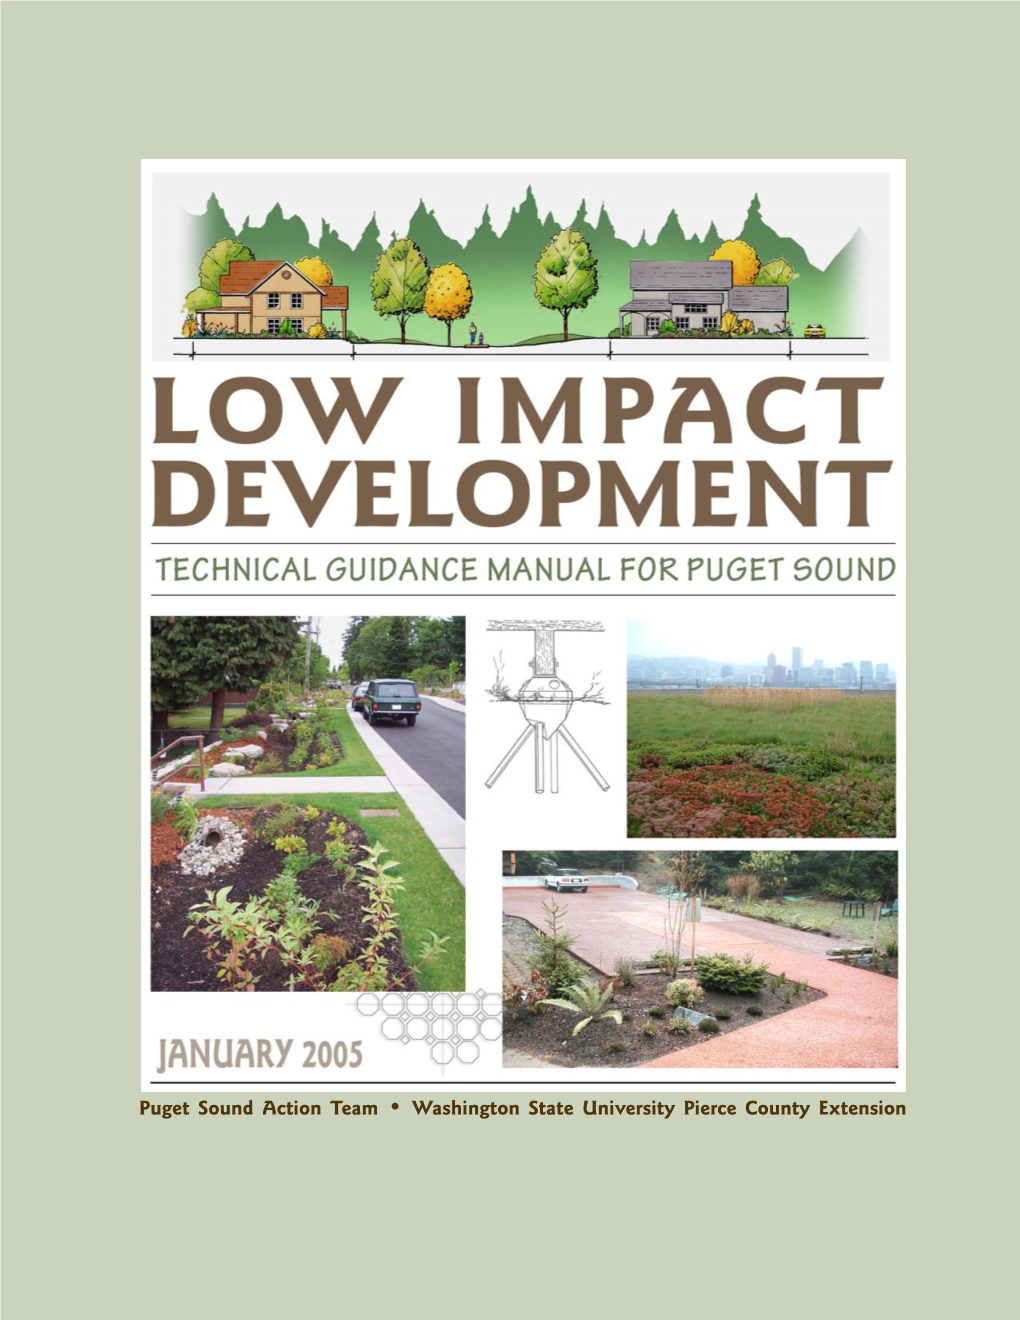 Low Impact Development Technical Guidance Manual for Puget Sound January 2005